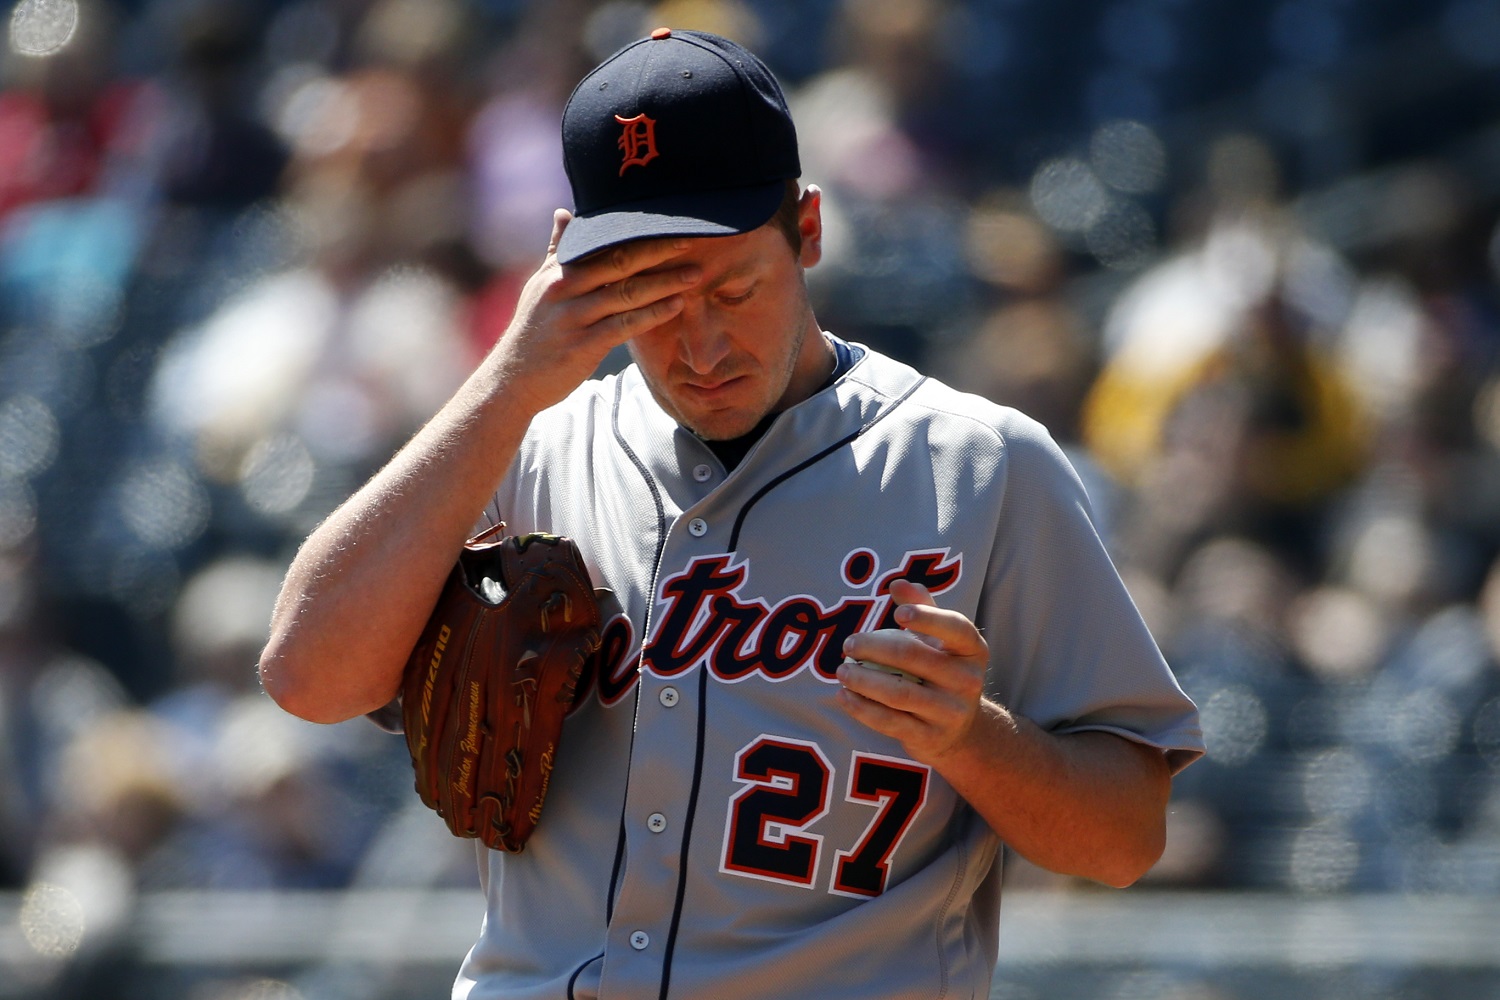 Detroit Tigers starting pitcher Jordan Zimmermann (27) collects himself on the mound during the first inning of a baseball game against the Pittsburgh Pirates in Pittsburgh, Thursday, April 14, 2016. (AP Photo/Gene J. Puskar)